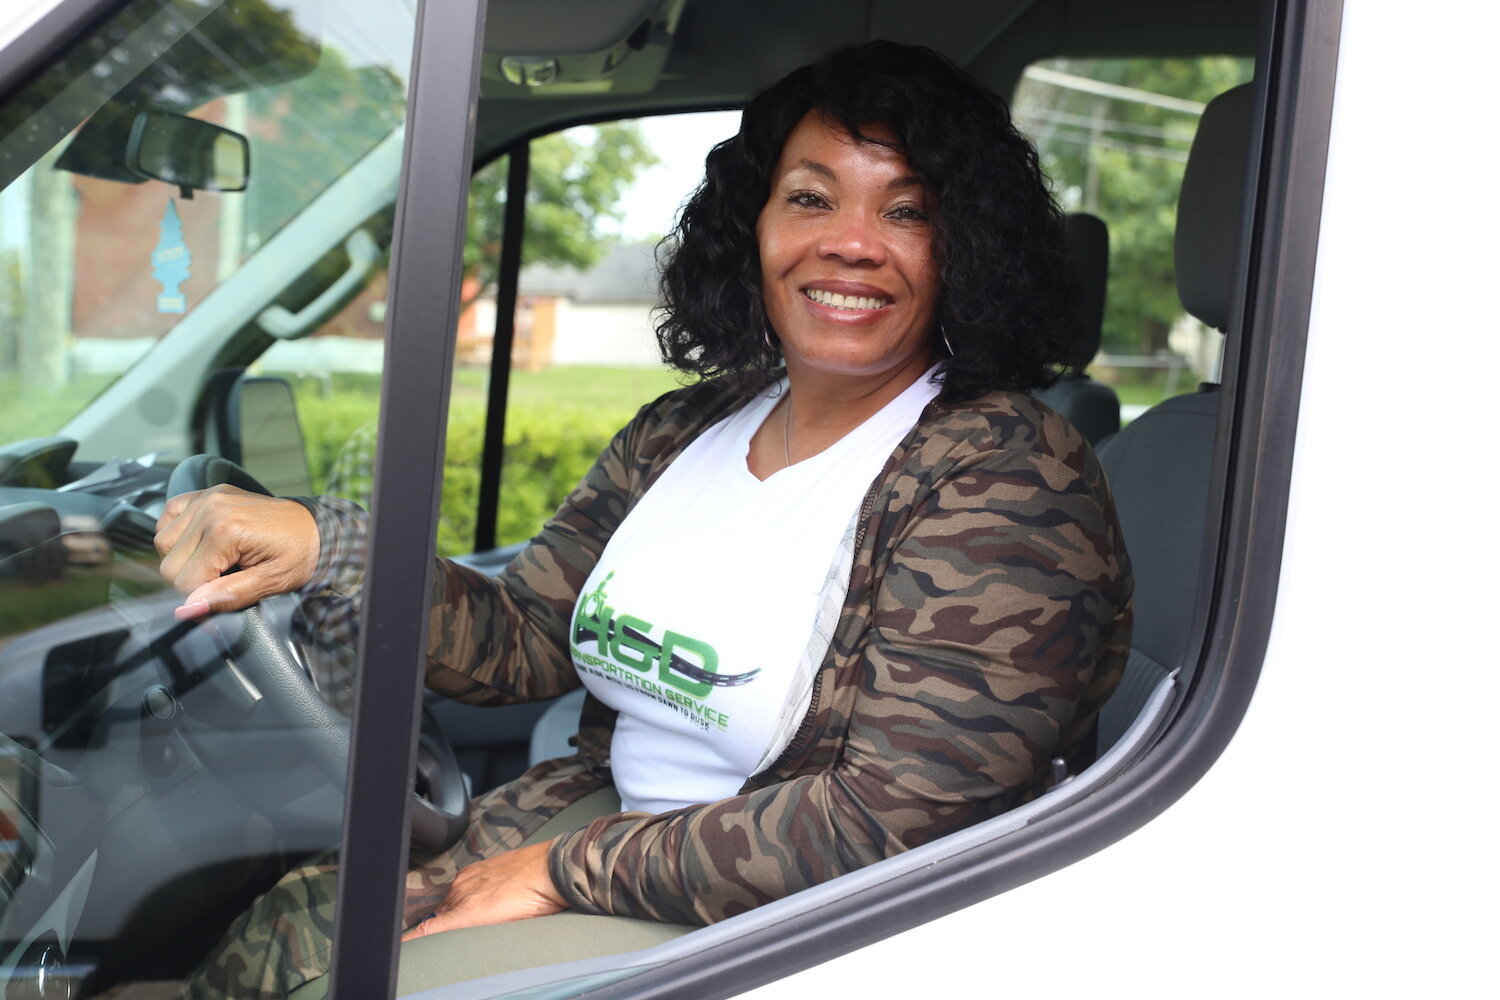 H & D Transportation Services, LLC, plans to launch this fall to provide reliable, wheelchair-accessible transportation for any non-drivers in Fort Wayne.